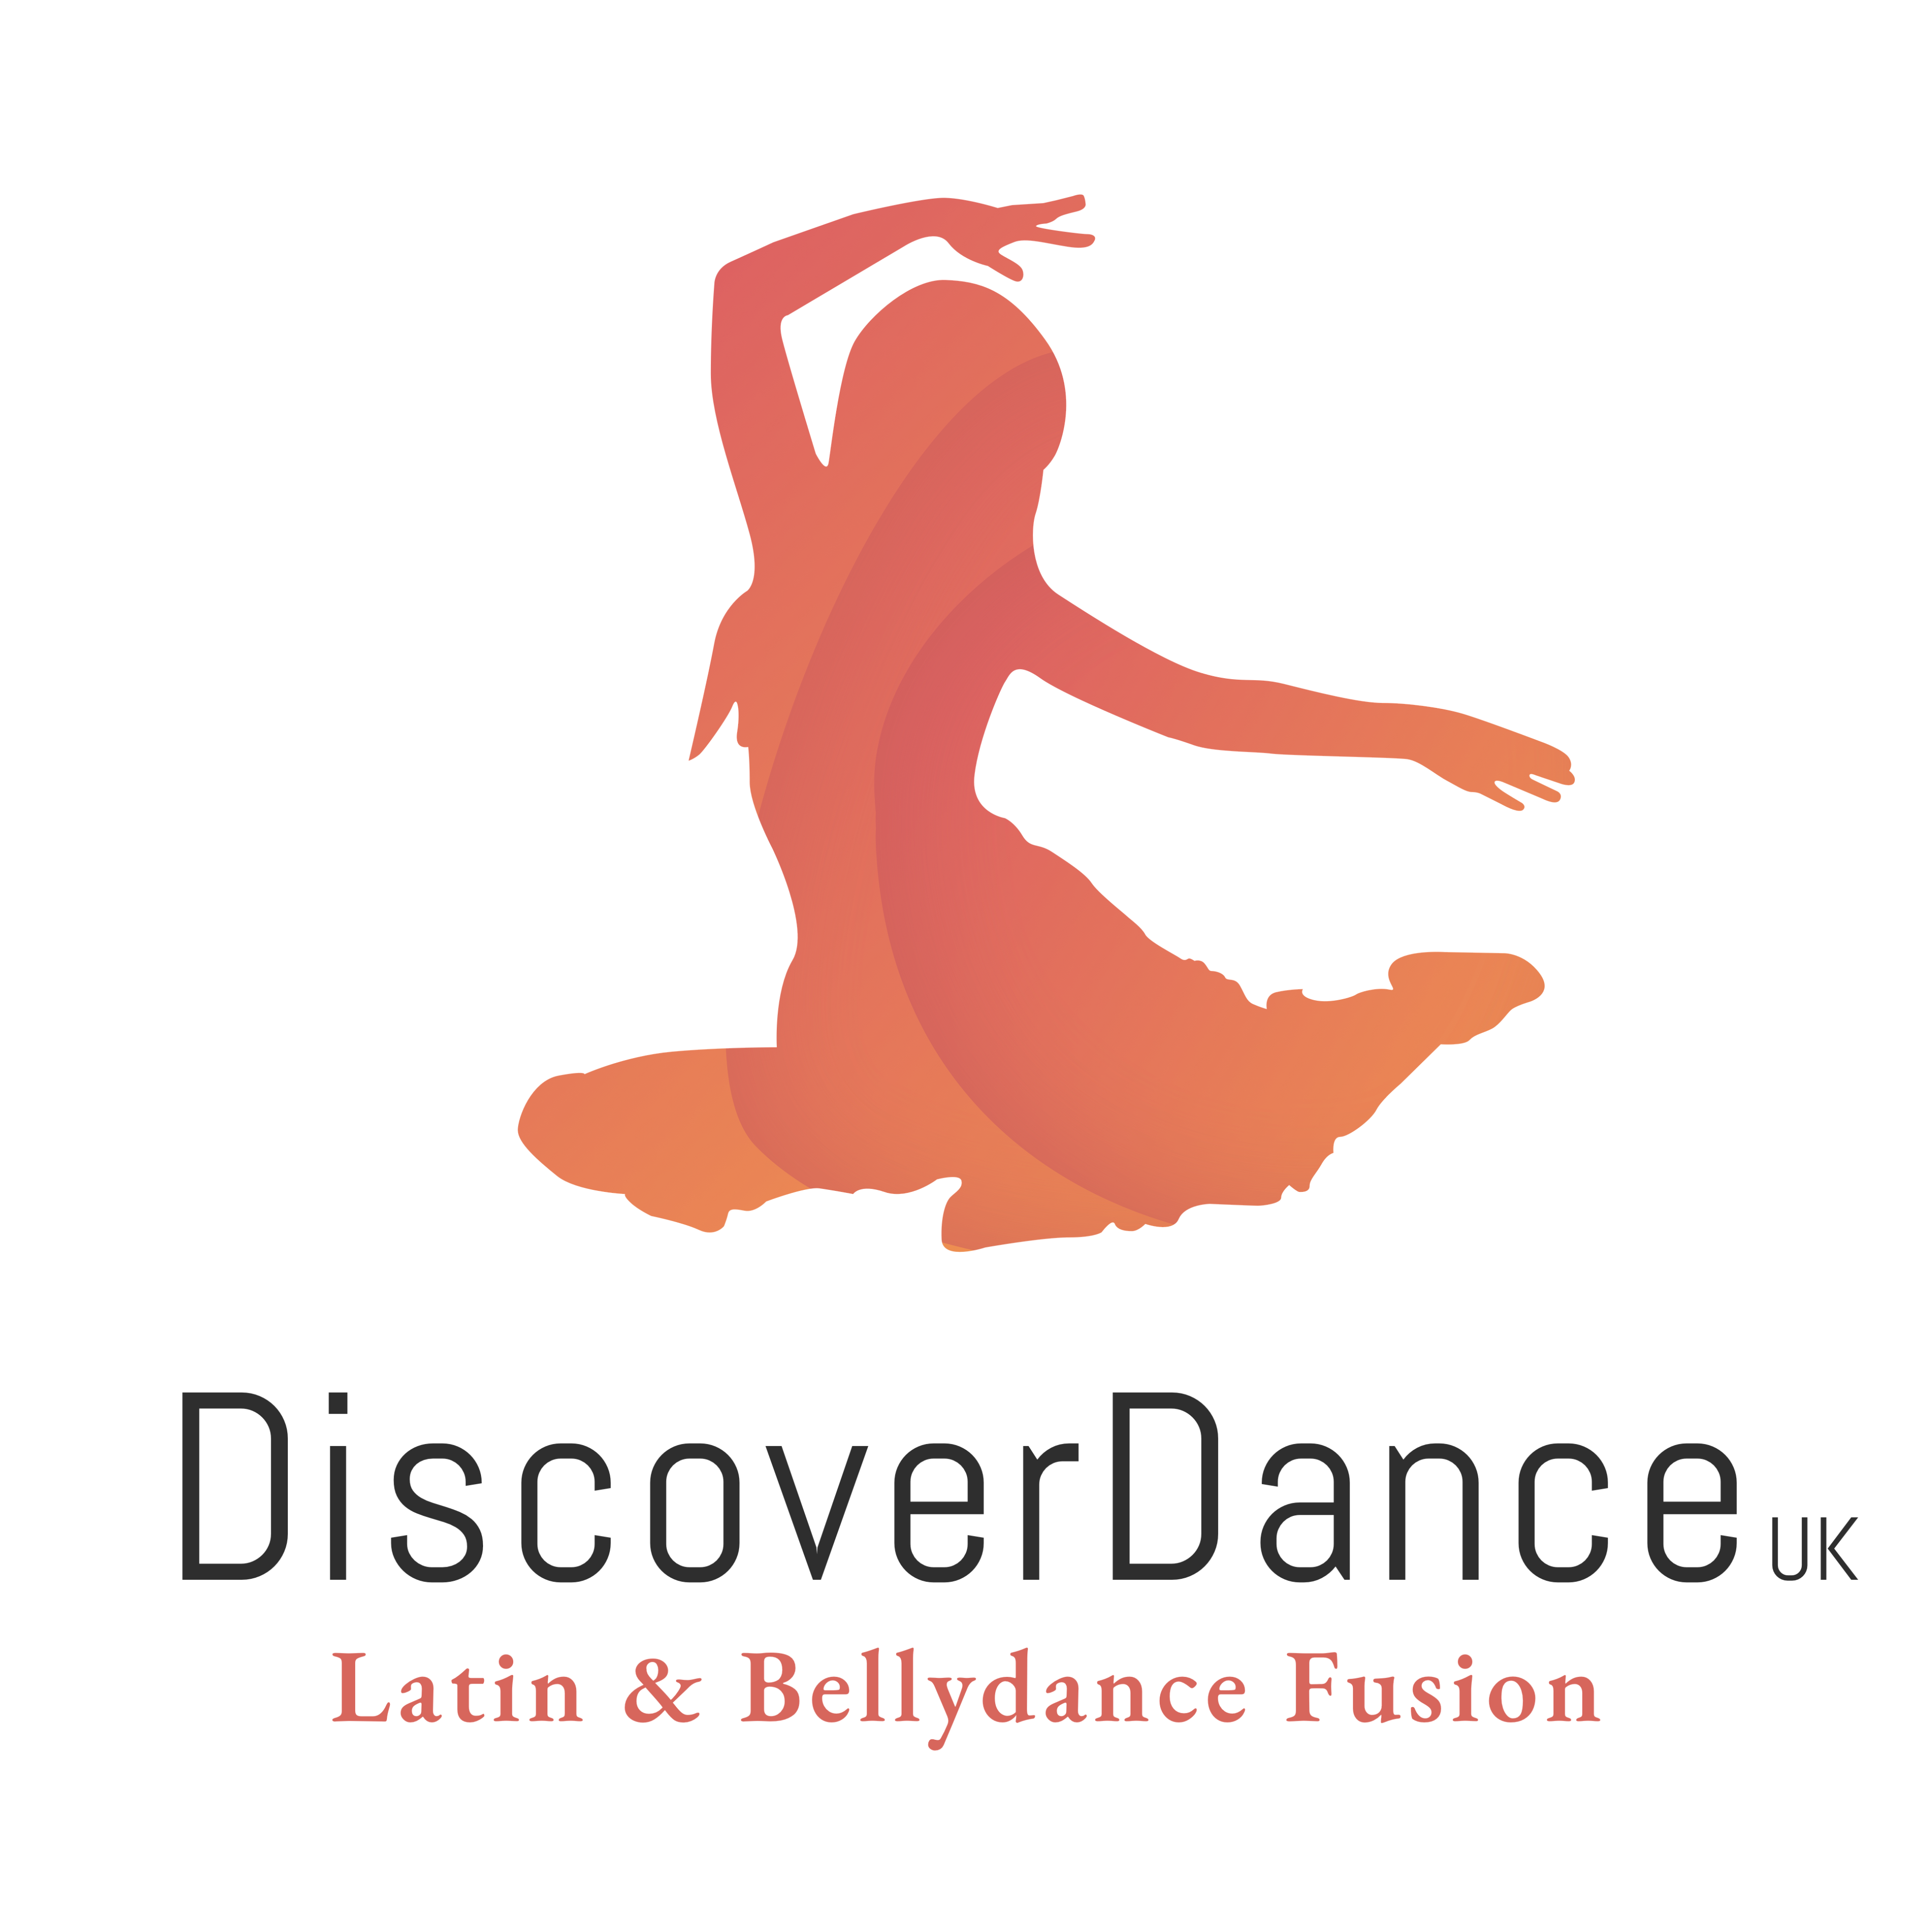 Discover Dance UK